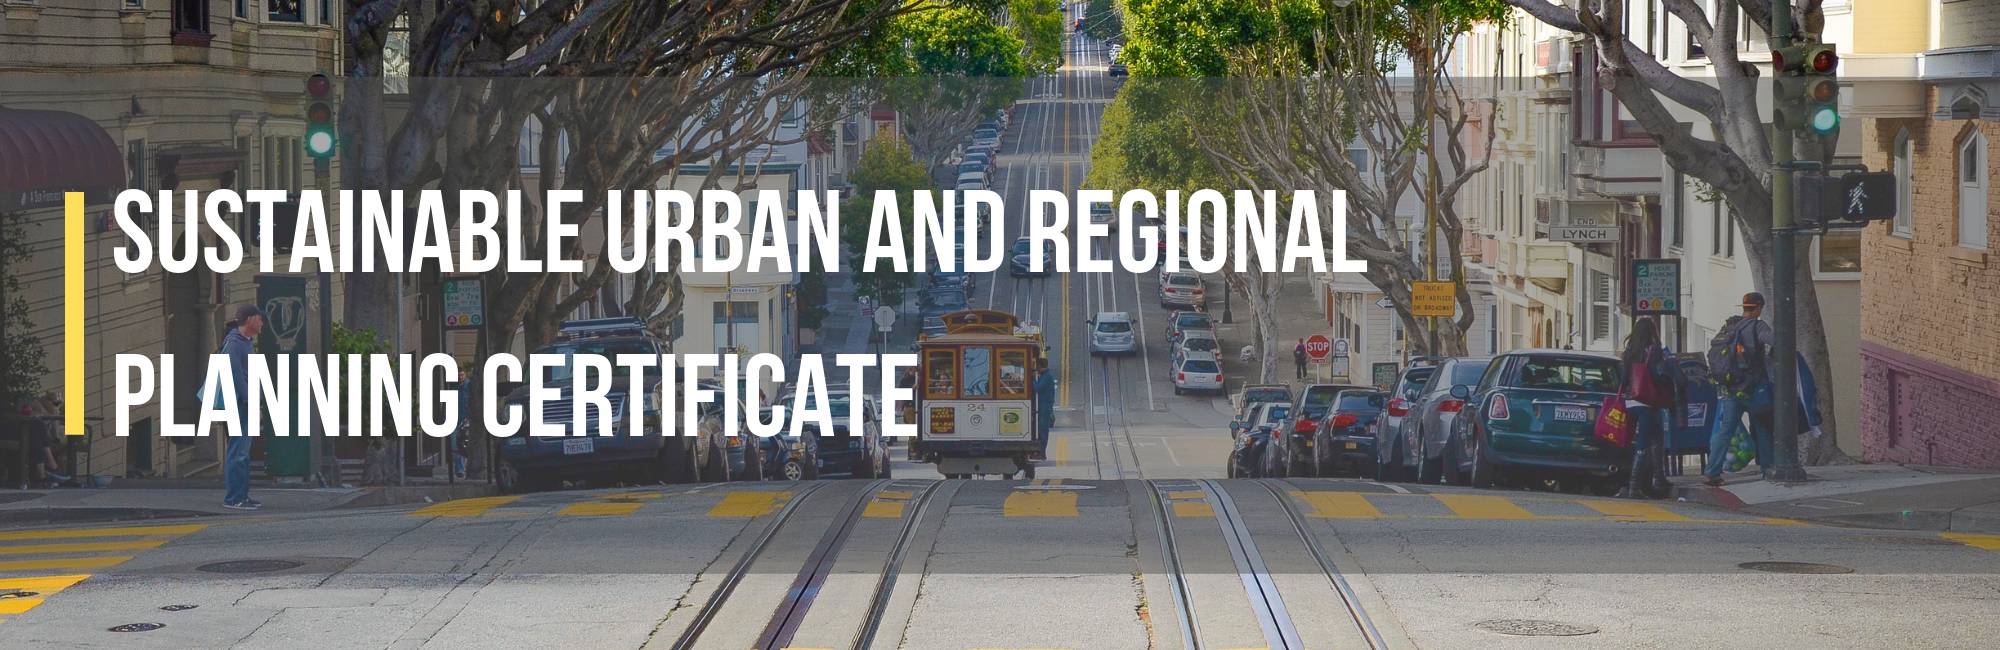 Sustainable Urban and Regional Planning Certificate